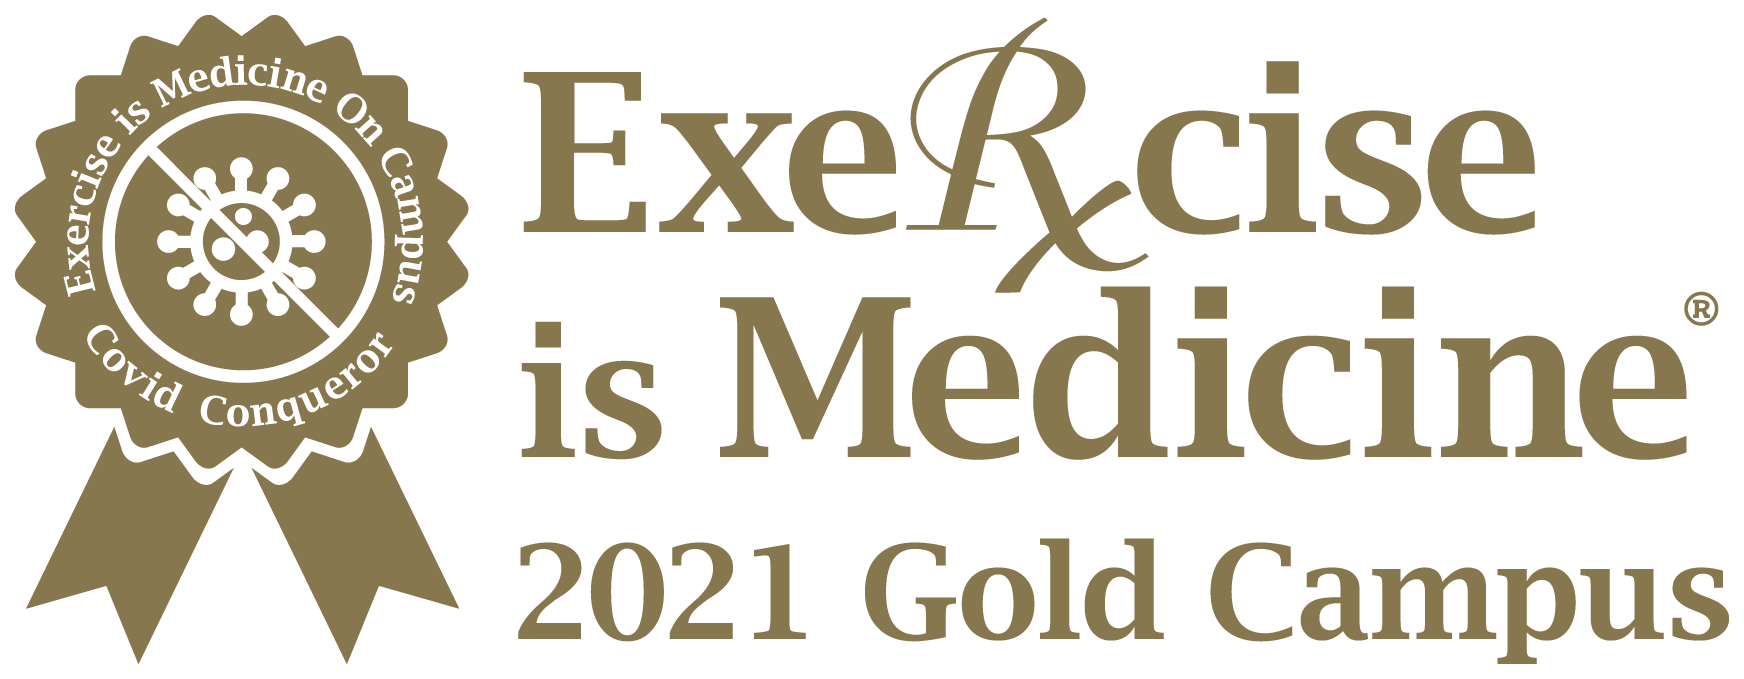 Exercise is Medicine 2021 Gold Campus Award